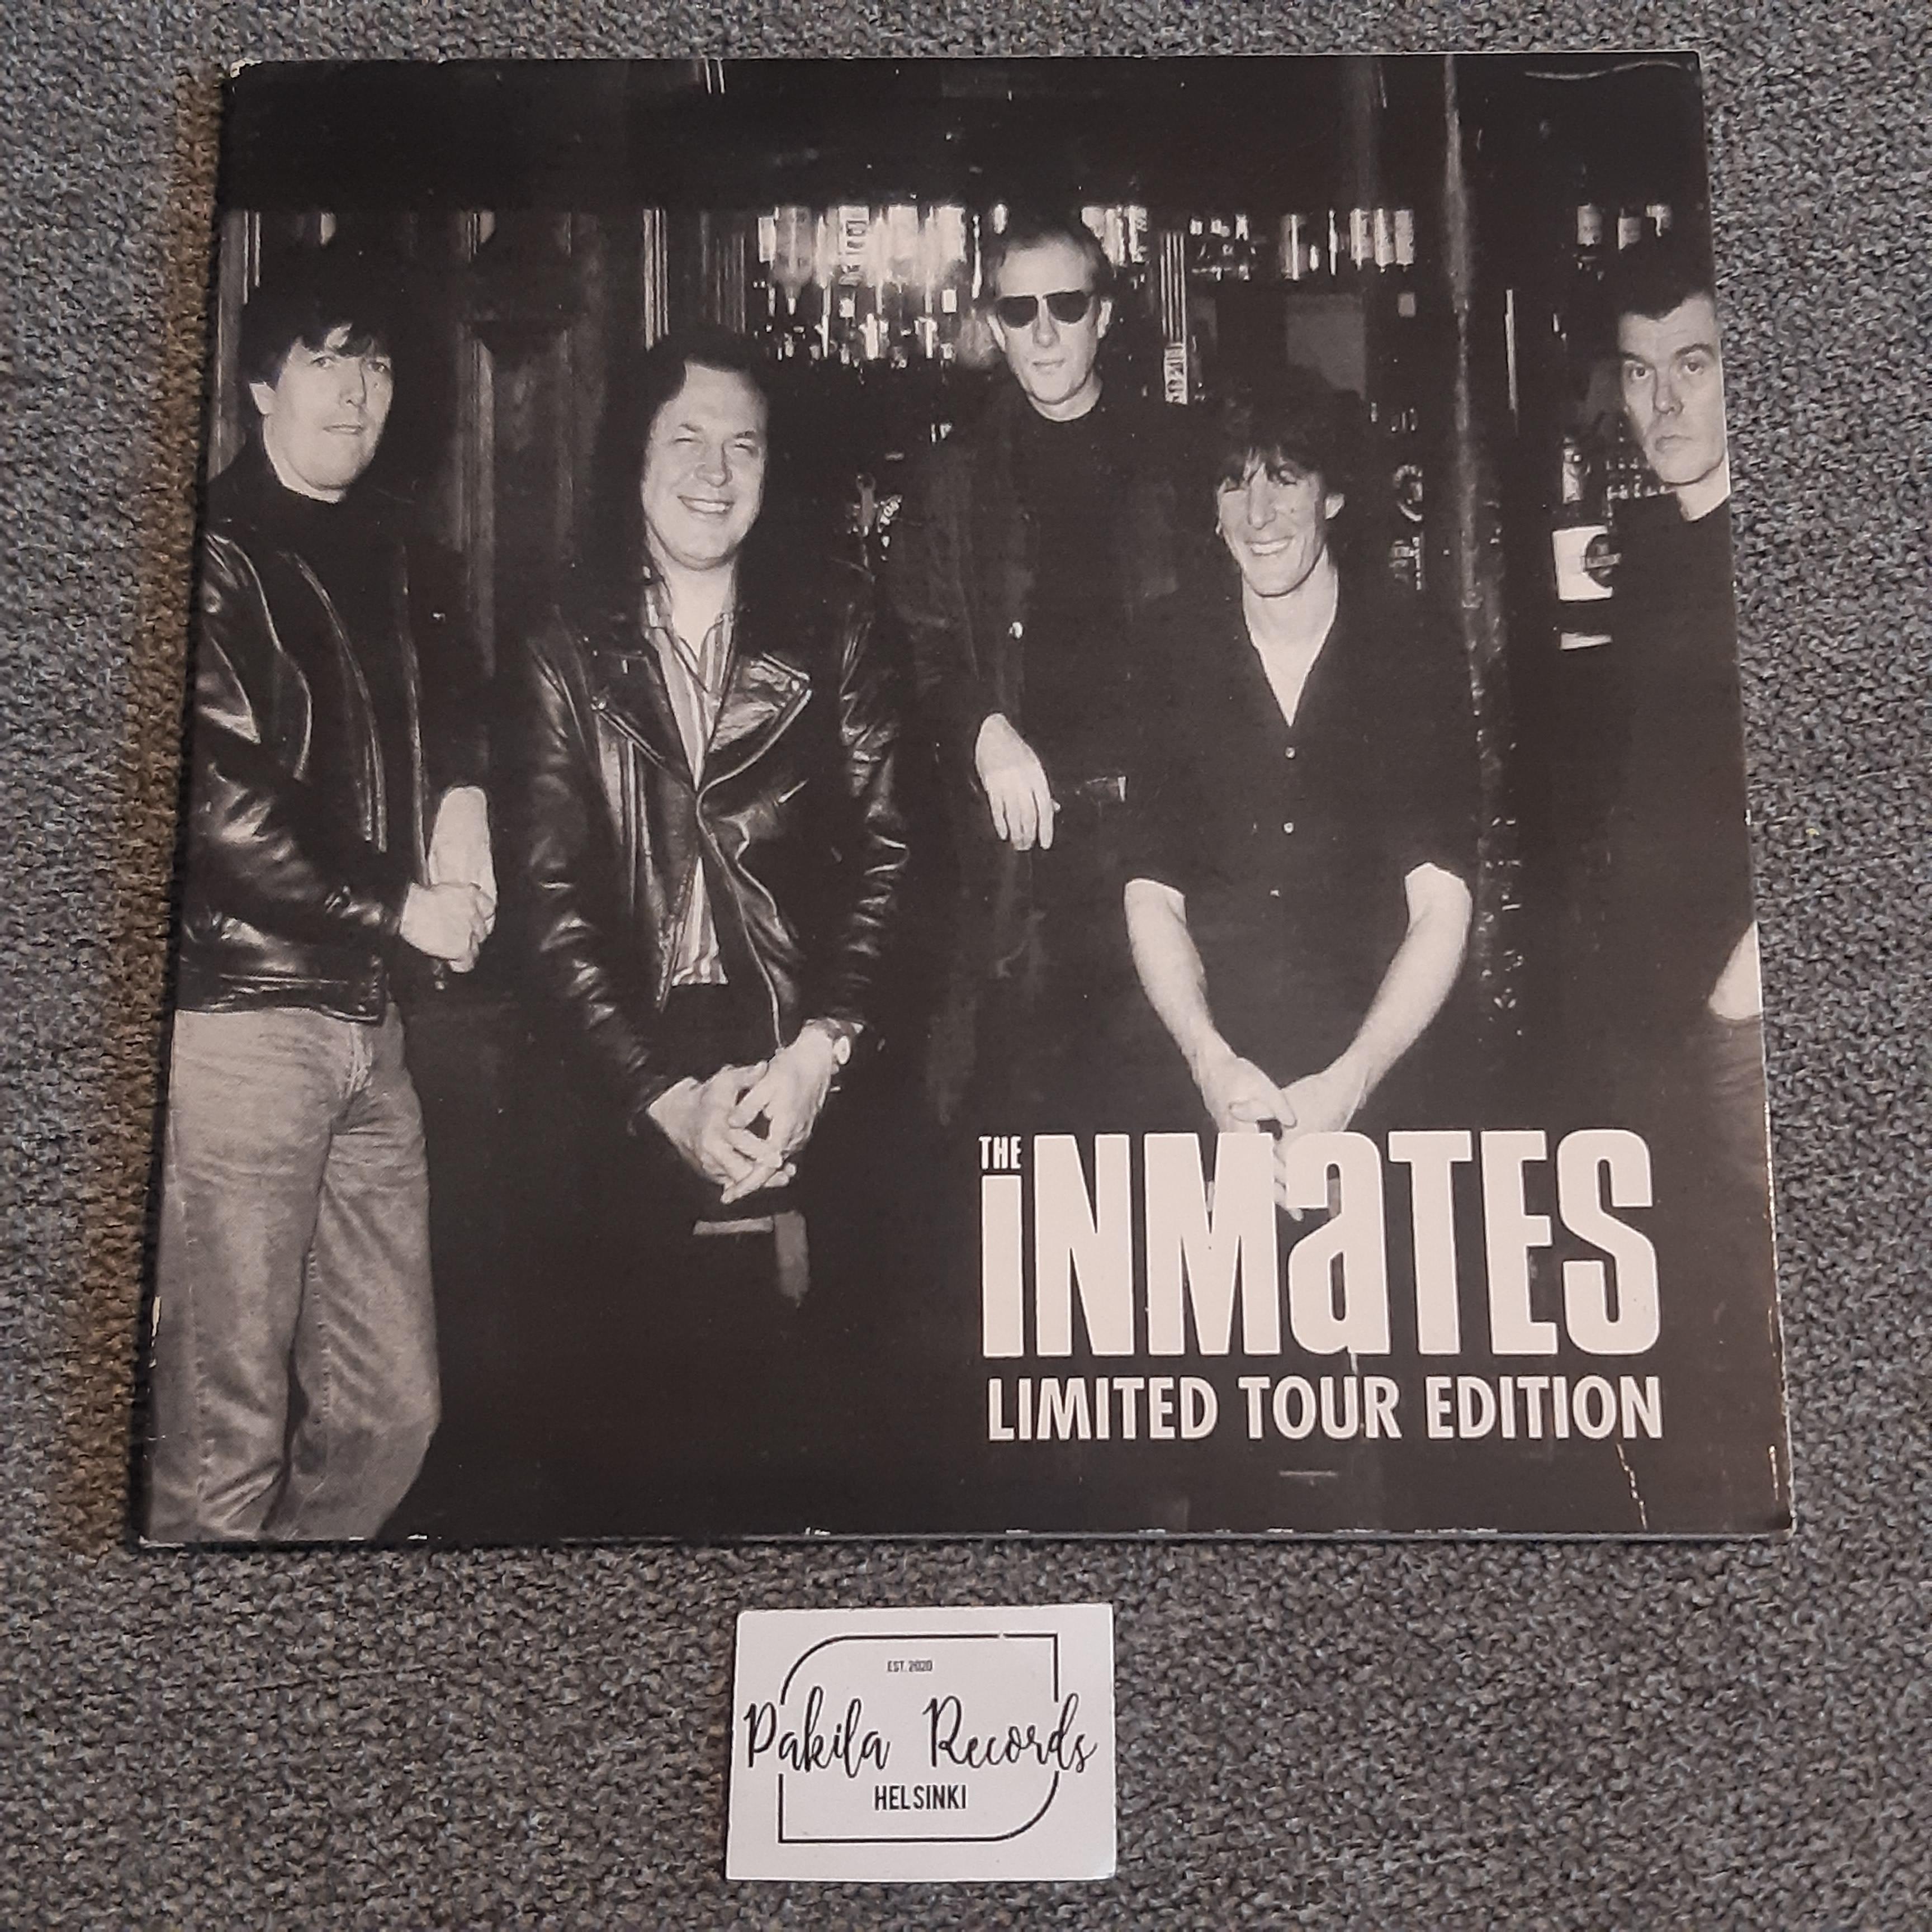 The Inmates - Limited Tour Edition - CD (käytetty)